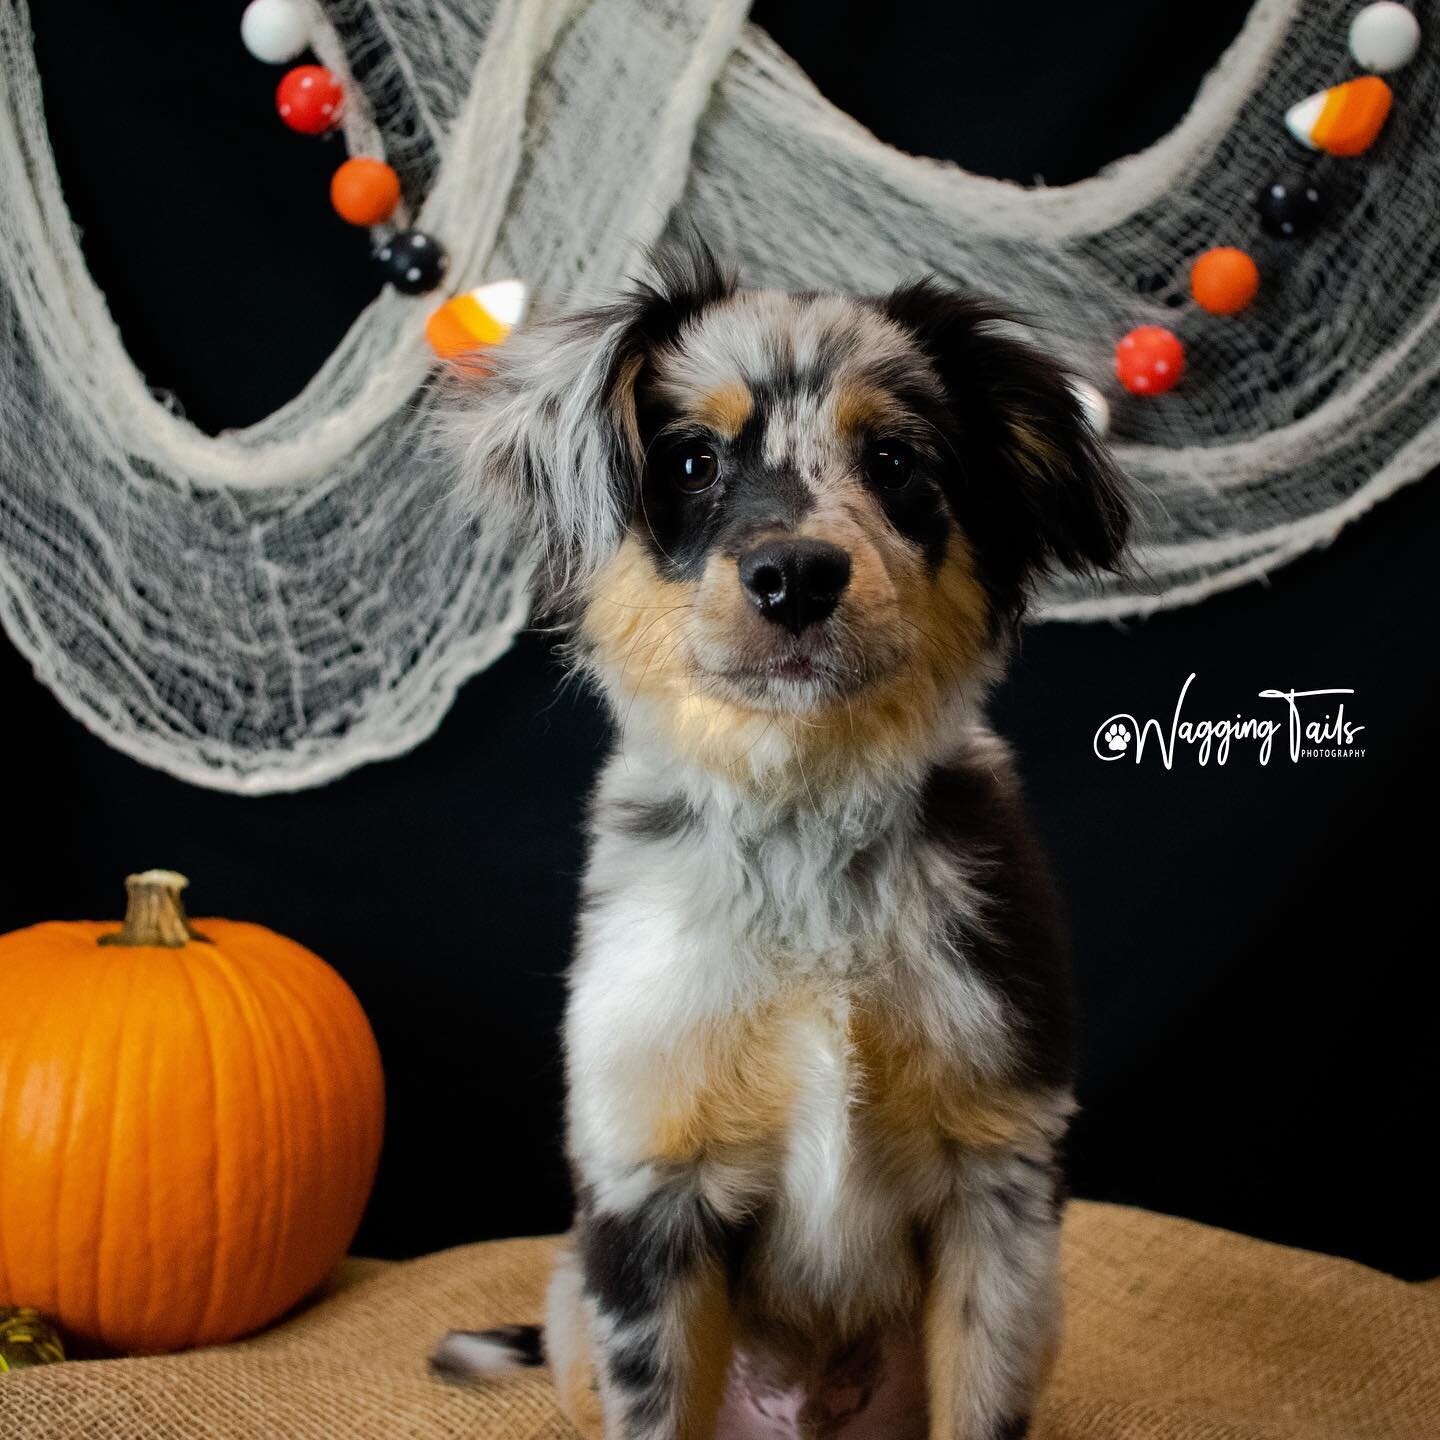 🐾👻 Wagging Tails is coming back for Ruff&rsquo;s 2nd Howloween Bash! Get photos of your dog dressed in costume and out of costume! Only $20 / per dog additional onto your daycare fee! Perfect for a fall portrait and a Halloween portrait! 

🐾🍂Our 